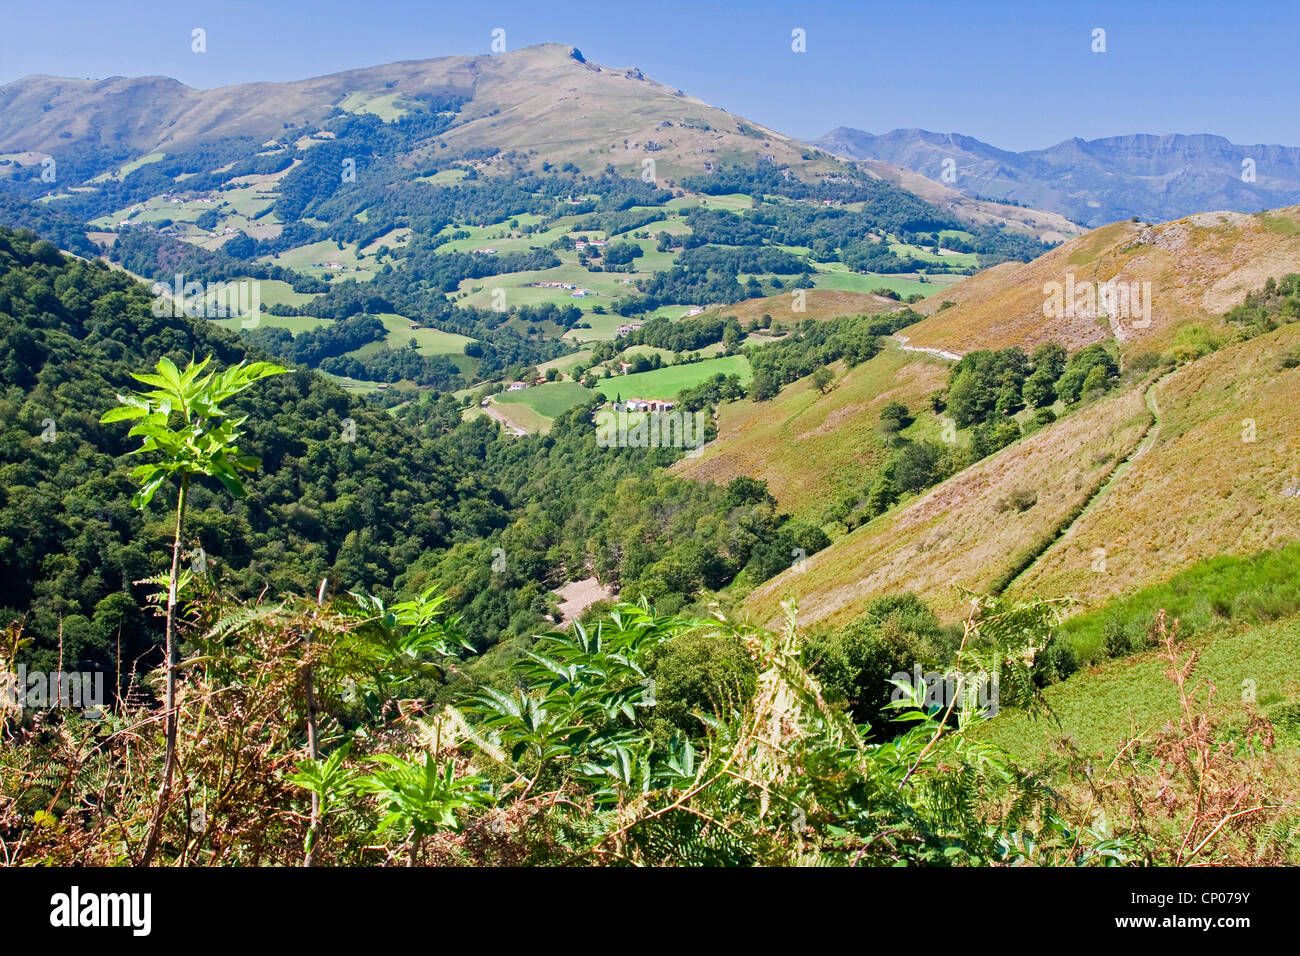 Pyrenees landscape at the way from St. Jean Pied de Port to Roncesvalles,  France, Pyr�nn�es-Atlantiques, Basque country, Basse Navarre Stock Photo -  Alamy